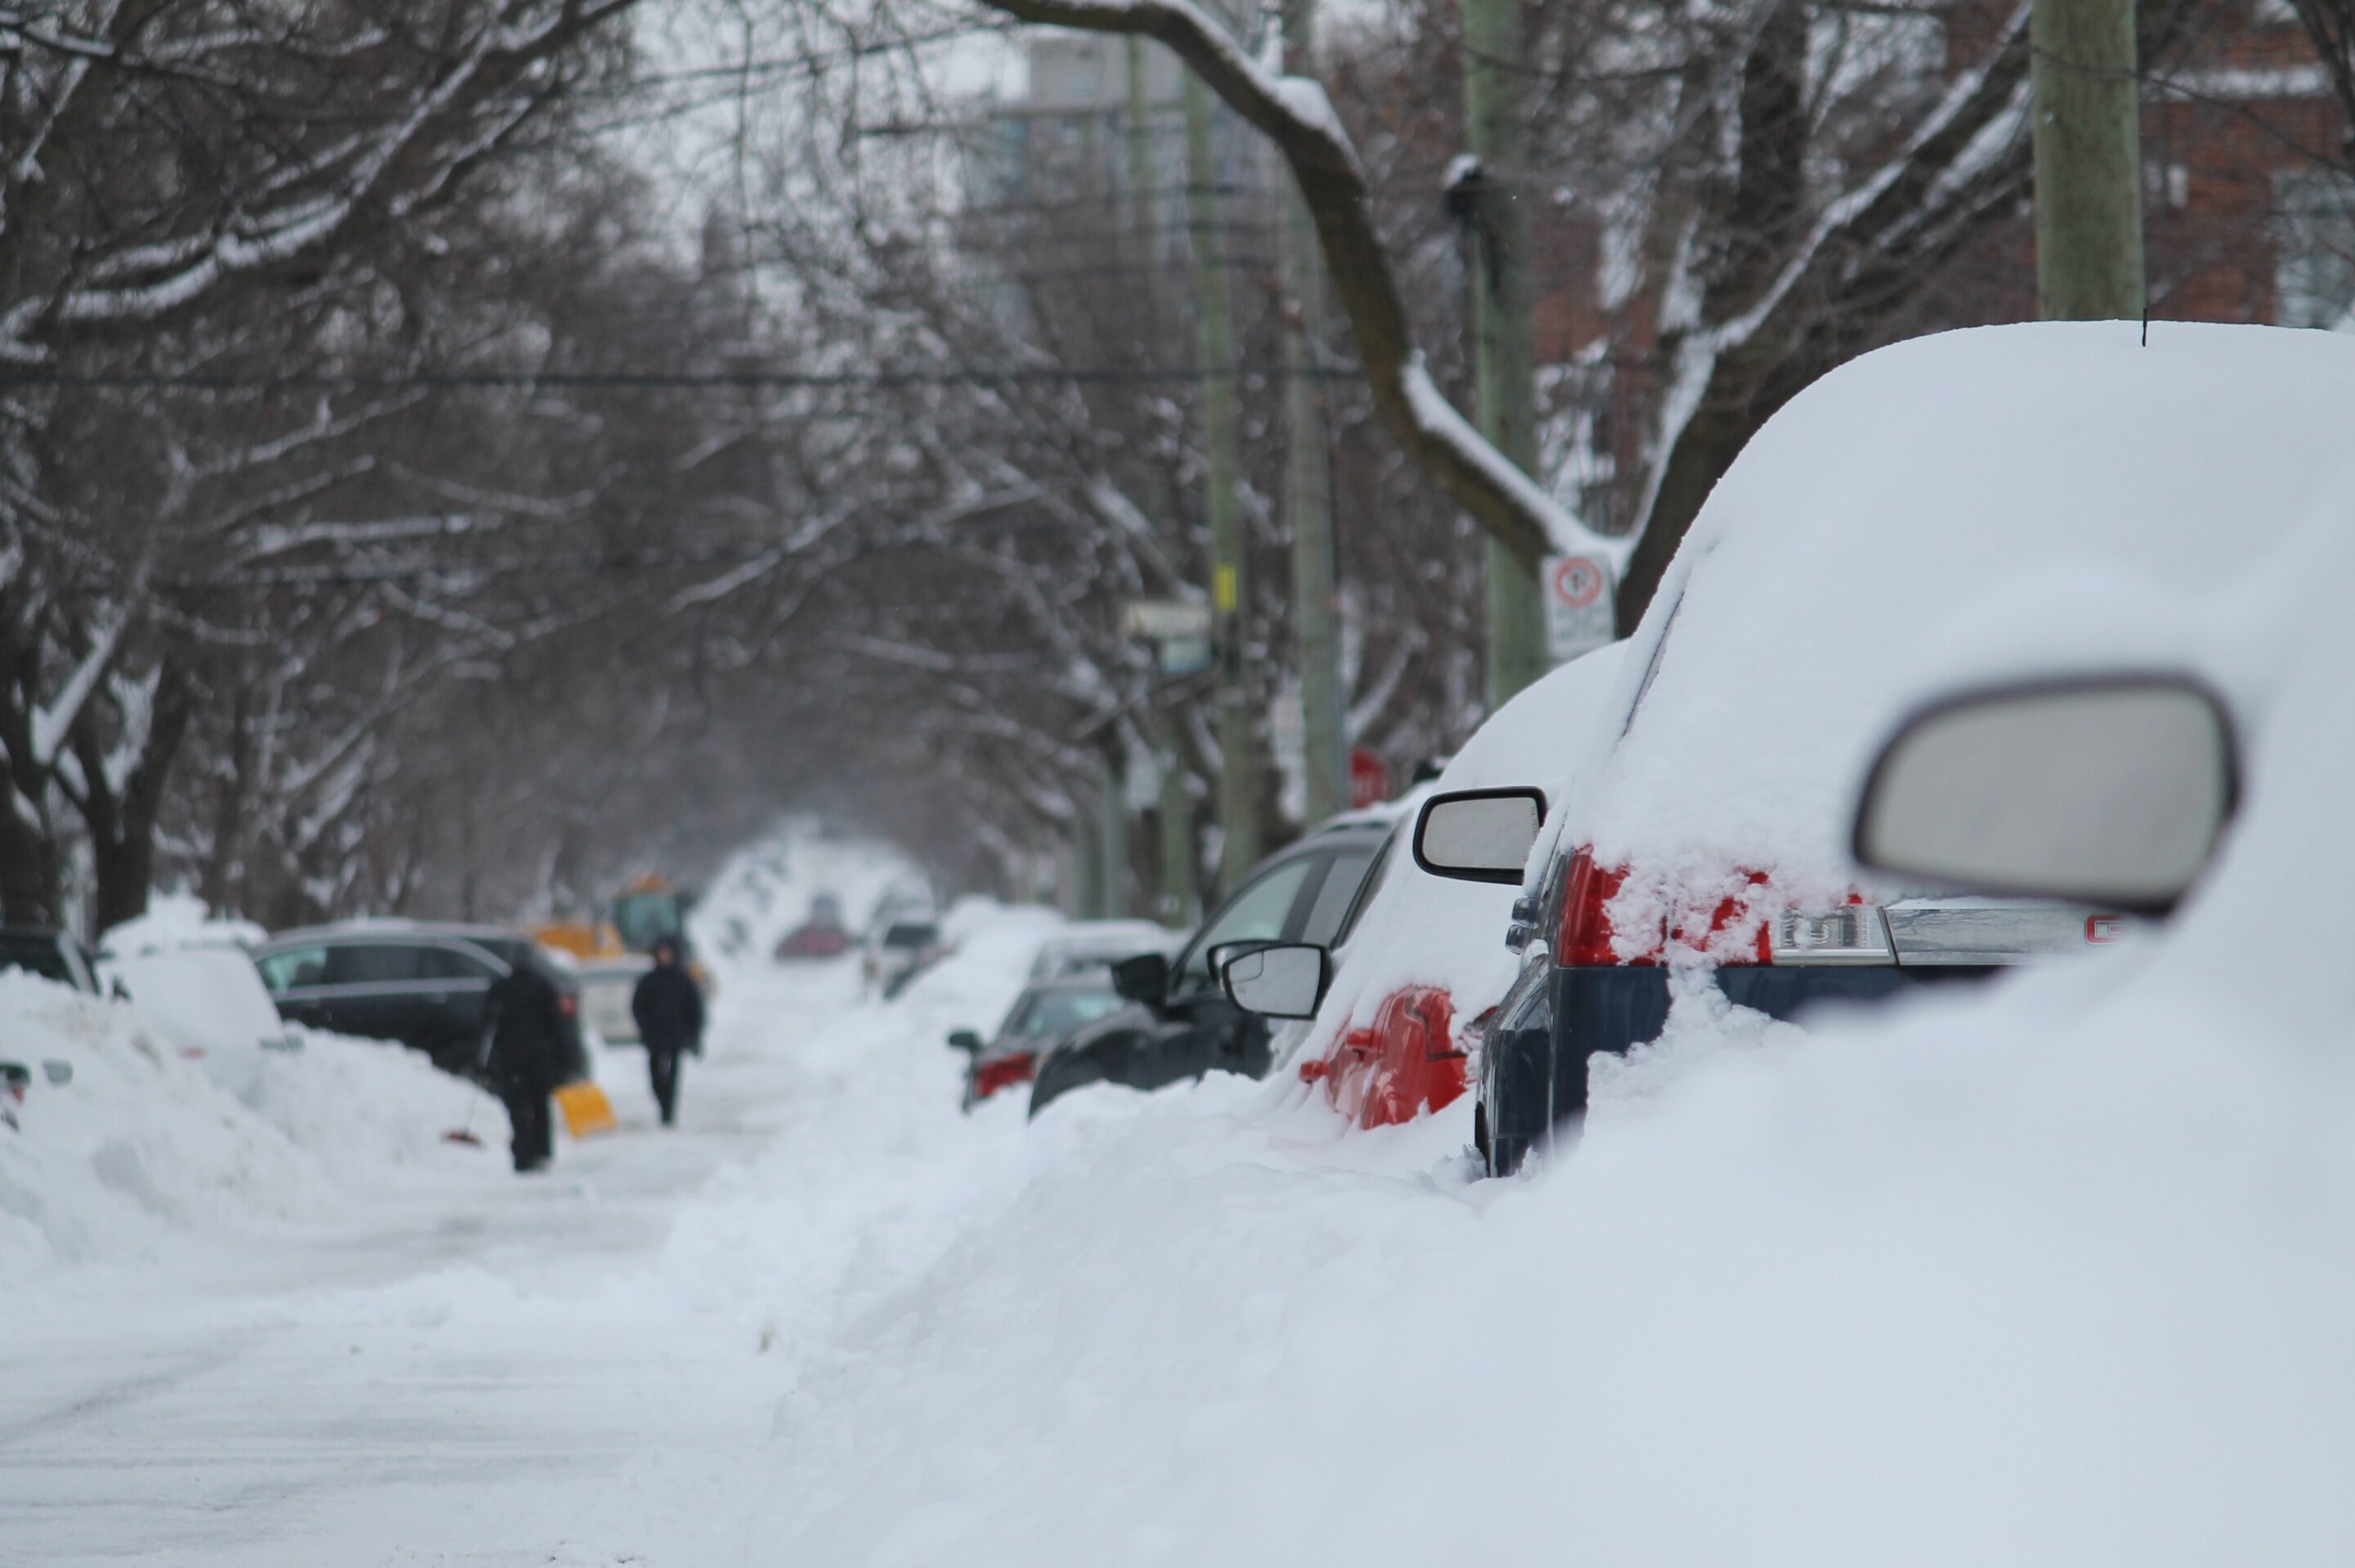 Climate change won't make winter storms and blizzards go away